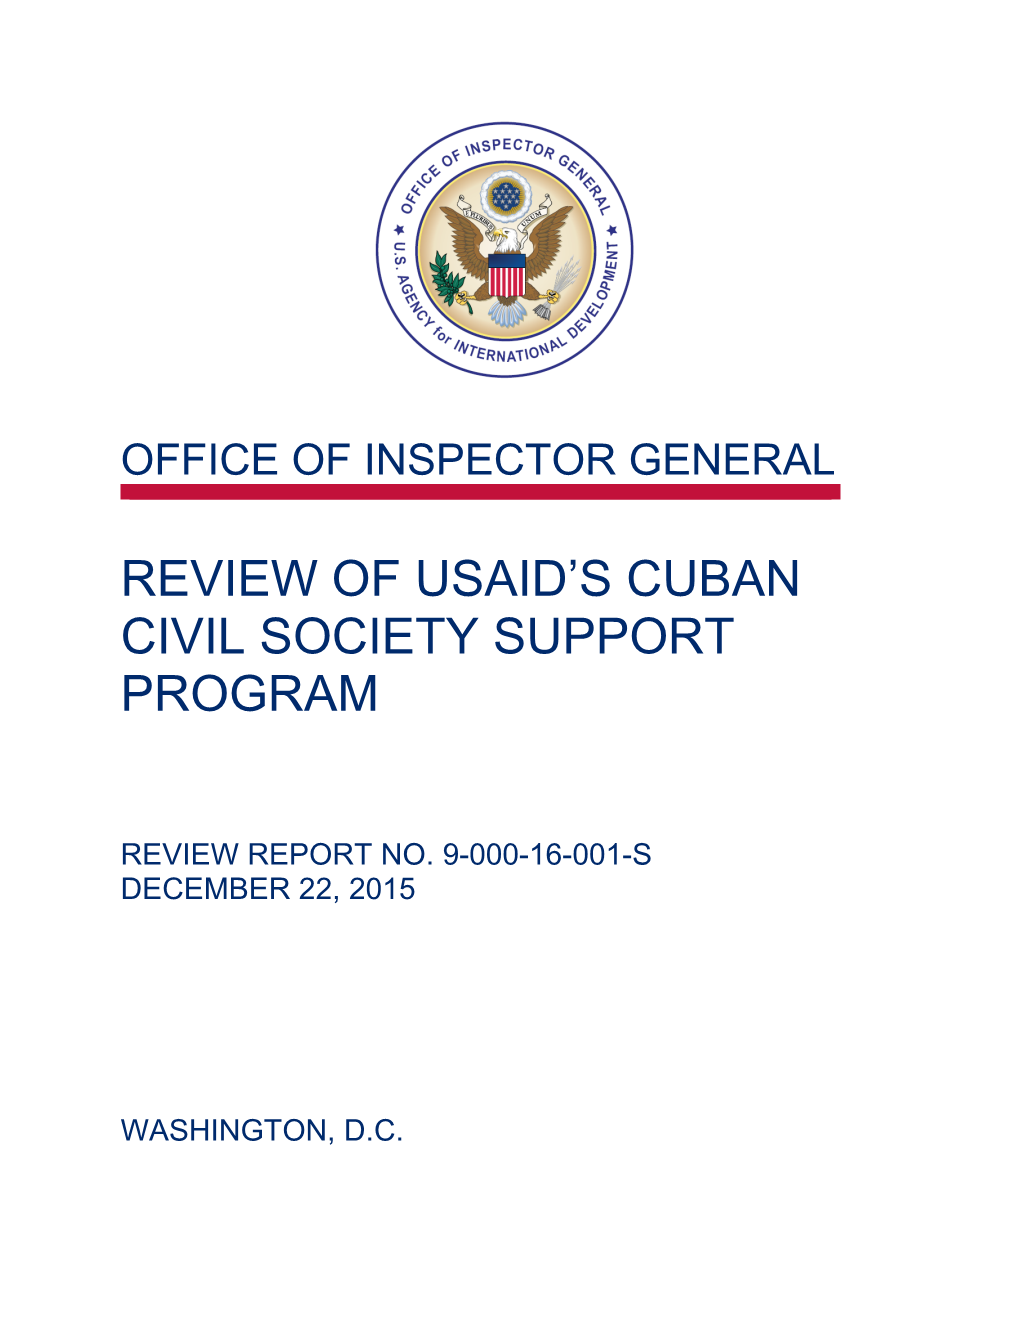 Review of USAID's Cuban Civil Society Support Program